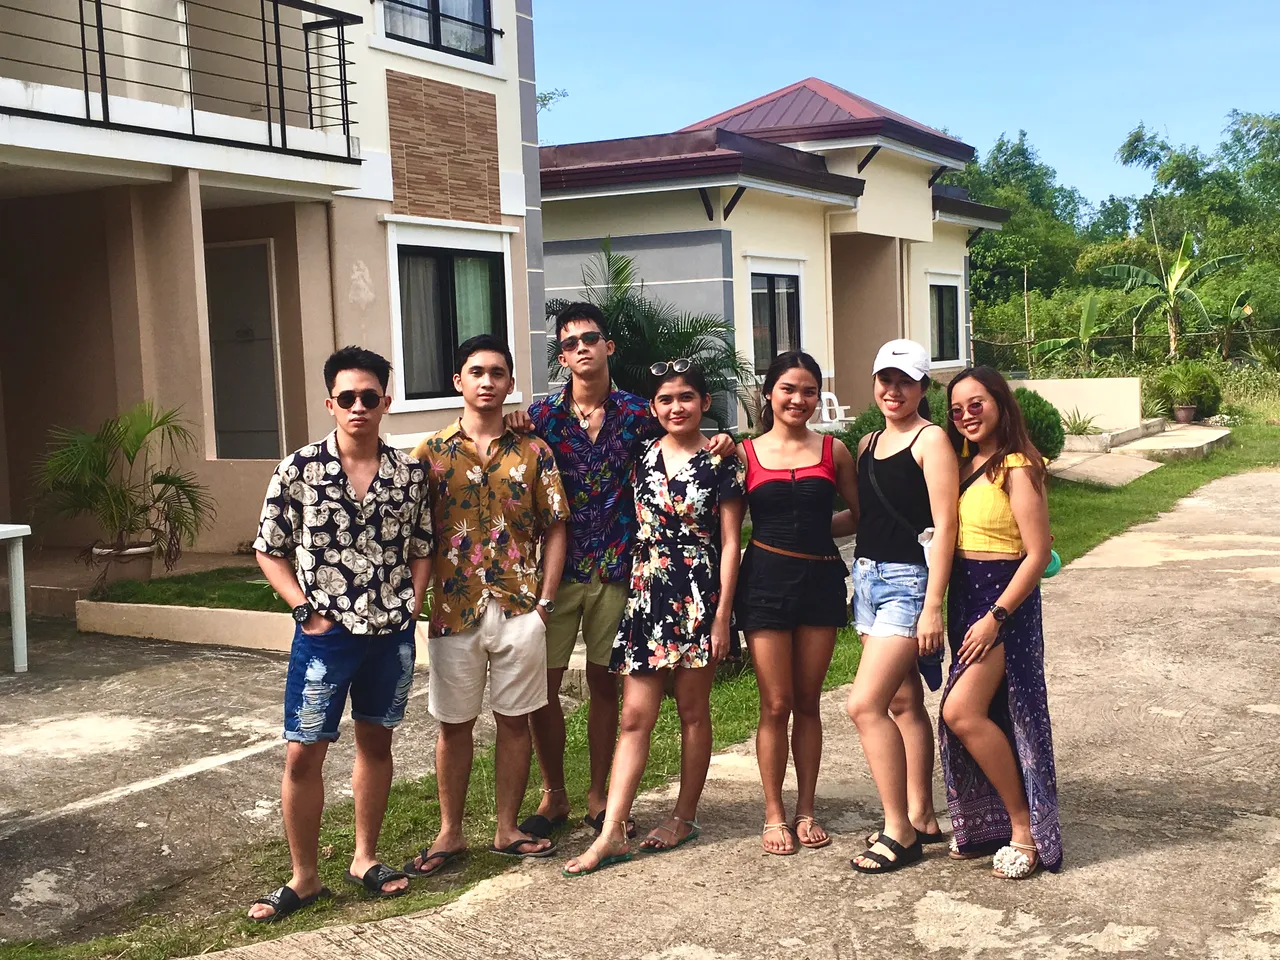 The Barkada in front of our homestay, outfits ready for any photo opportunity